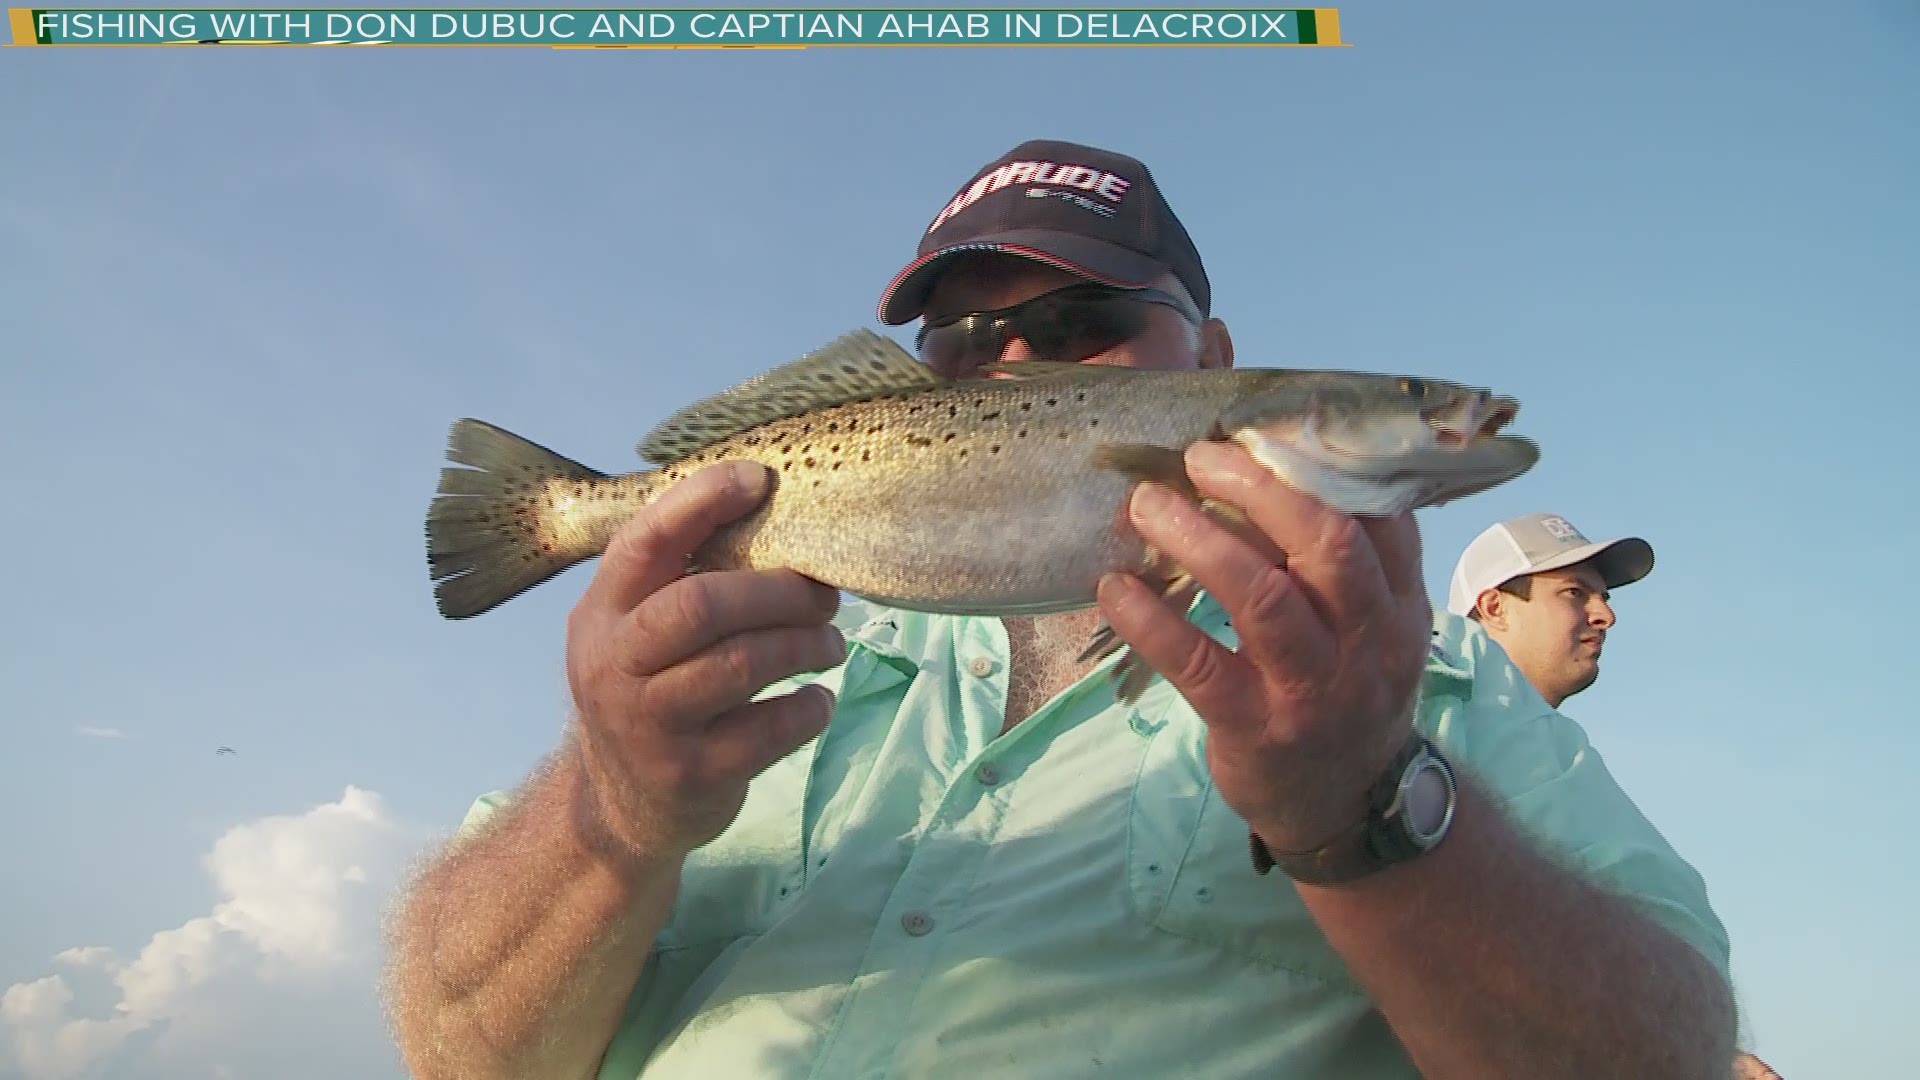 Fishing with Don Dubuc and Captain Ahab from Delacroix is really not about catching fish, it's about the process of catching fish. I also found out that there is competition, camaraderie, and "some" compassion among professional anglers in the restricted